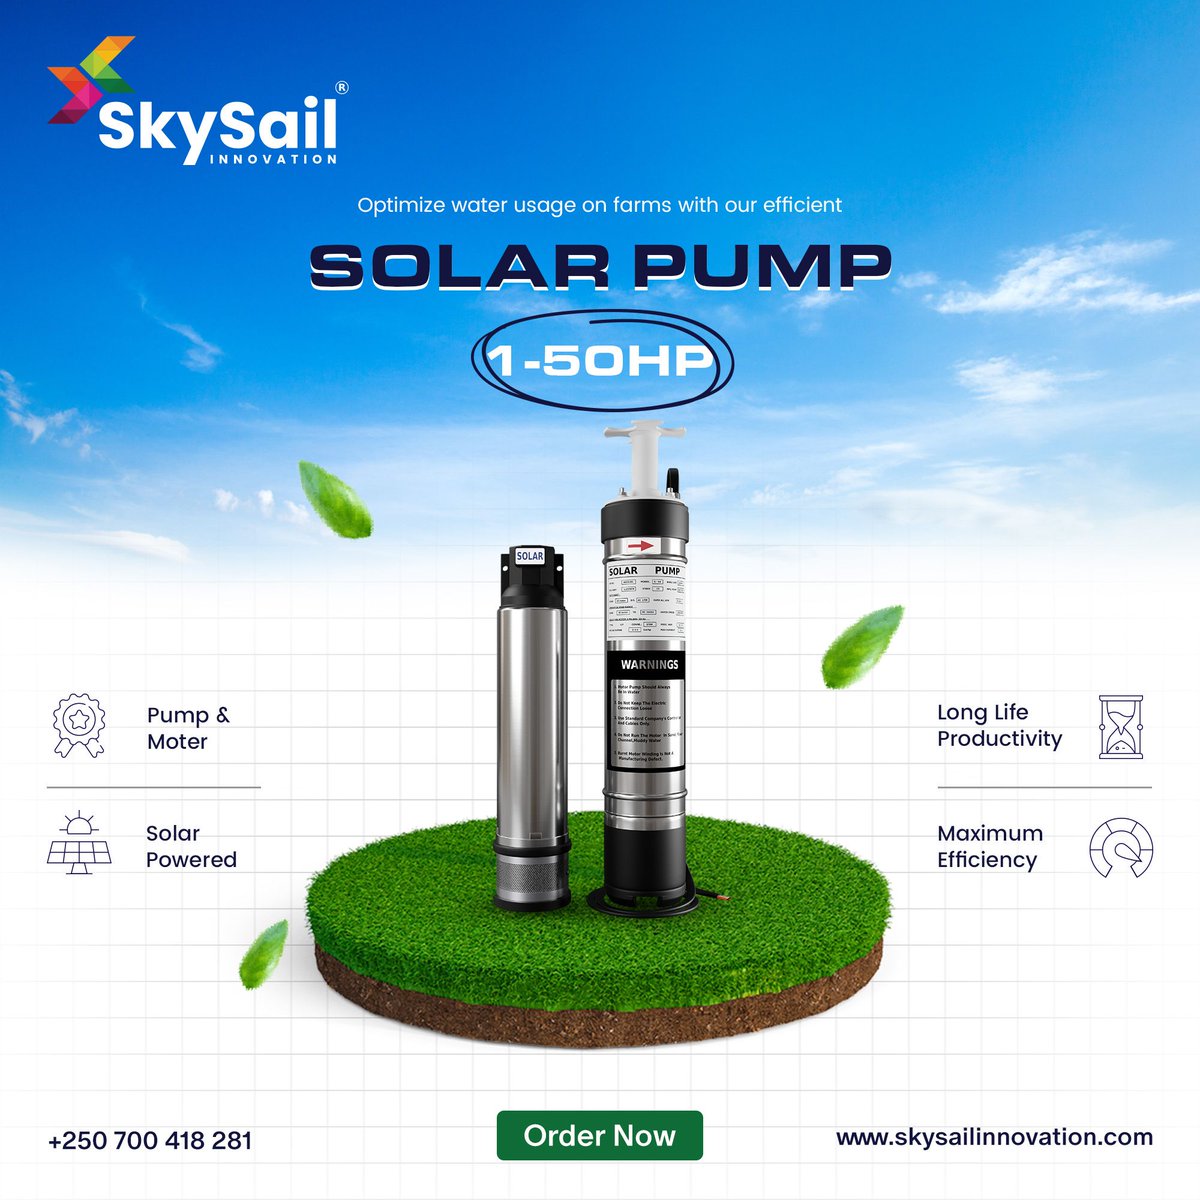 🌱 Optimize water usage on farms with SkySail Innovation's efficient Solar Pump 1-50HP! 🌞 Harness the power of the sun to irrigate your fields sustainably and efficiently. Let's cultivate a greener tomorrow together! 💧 #SkySailInnovation #SolarPump #SustainableAgriculture